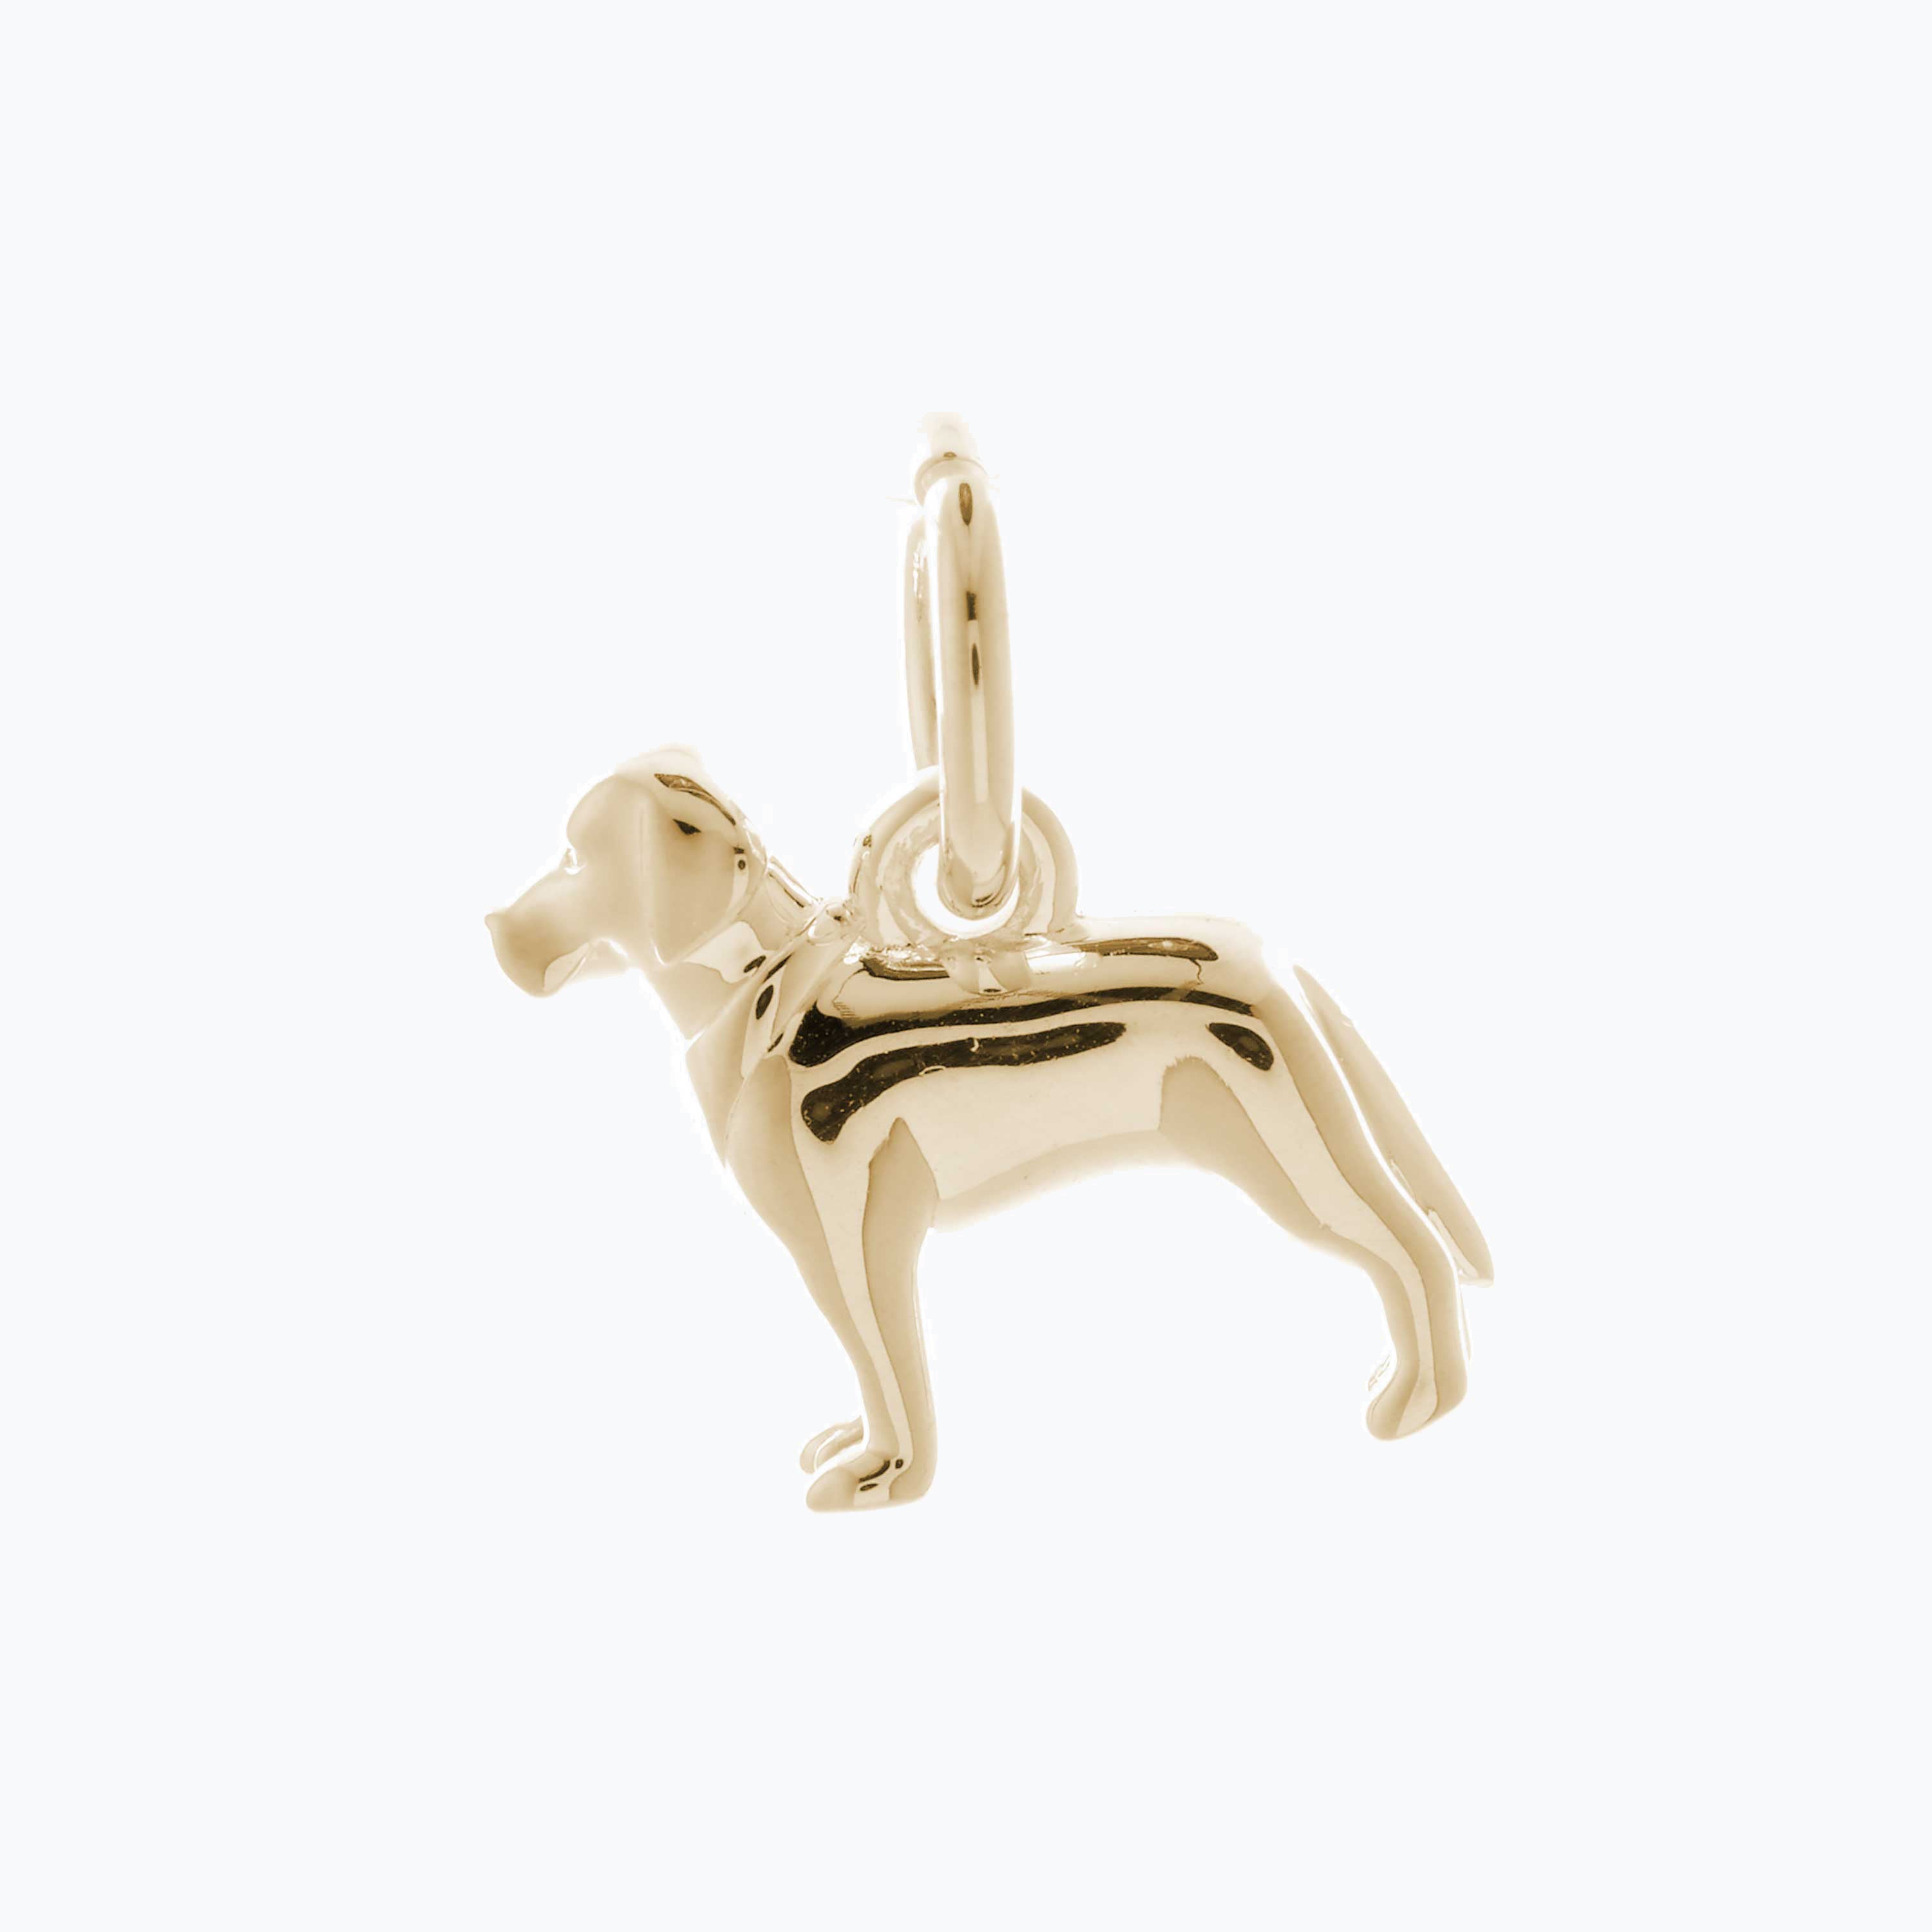 Solid 9ct gold drakes head Labrador charm with tiny bandana (optional), perfect for a charm bracelet or necklace.